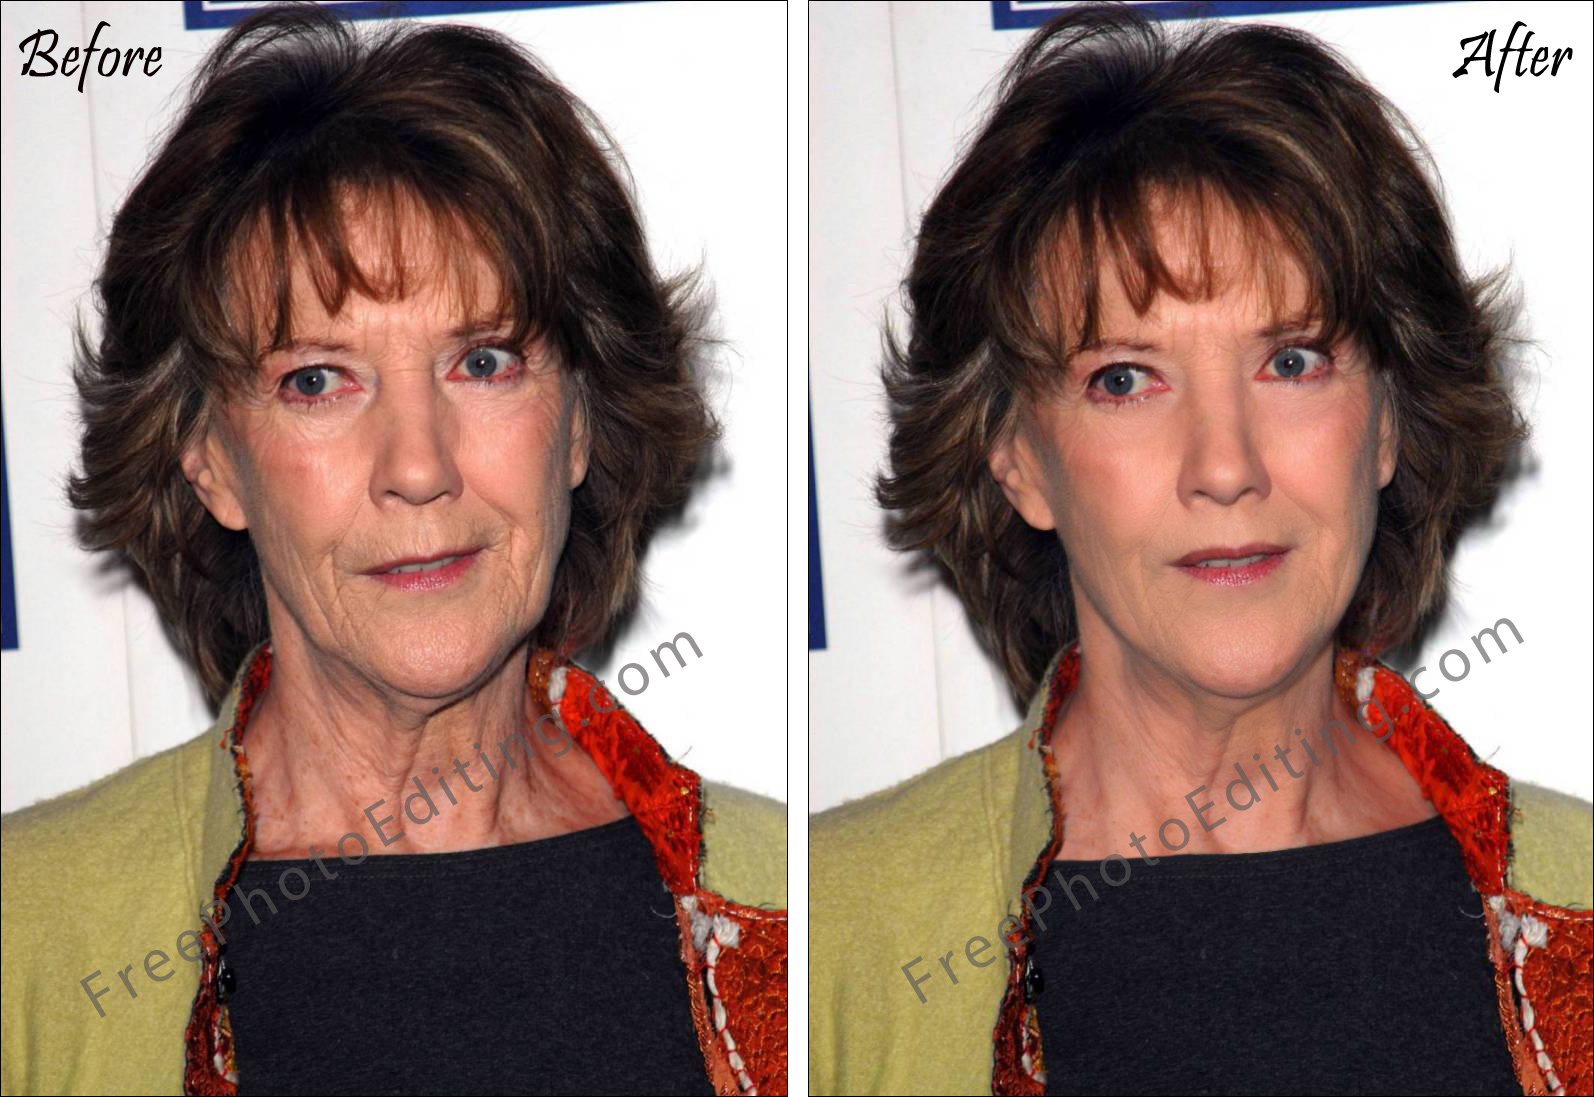 Photo editing before and after example of age reduction and blemish removal.